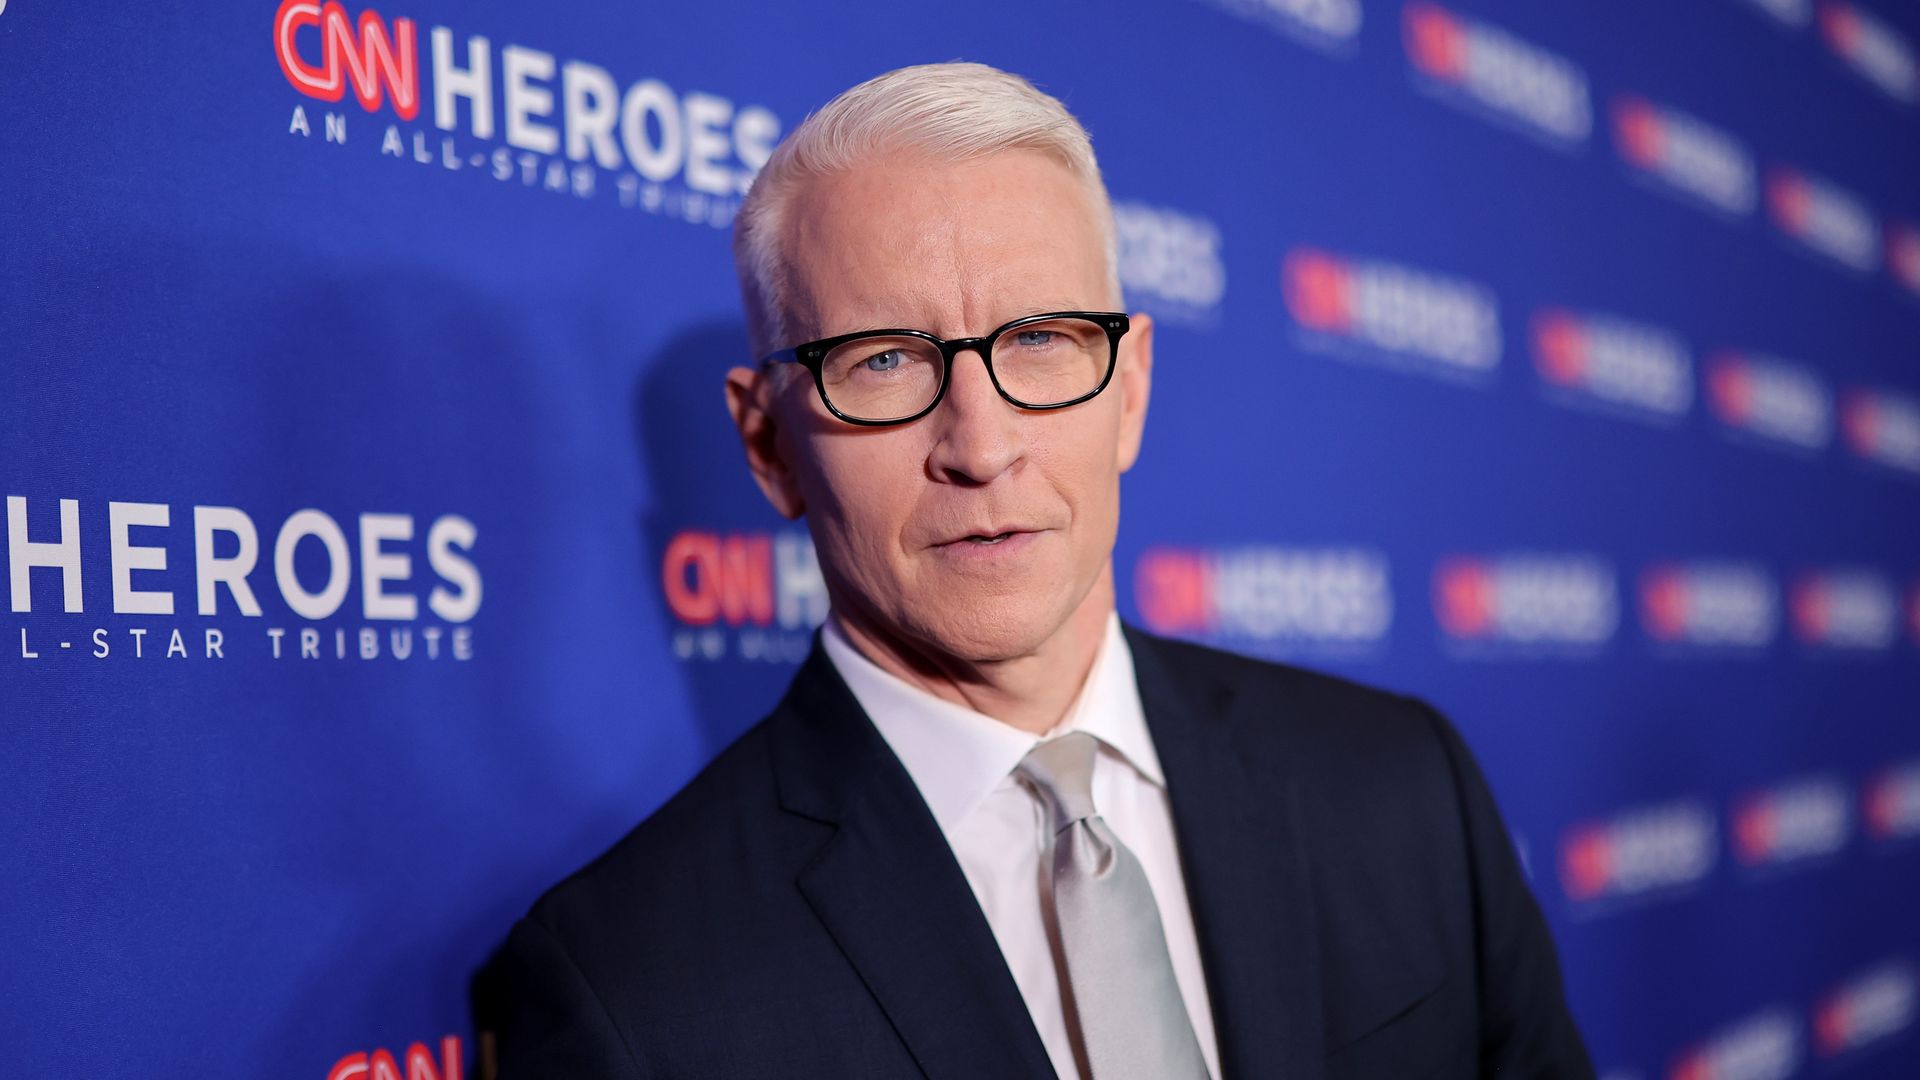 Anderson Cooper attends the 16th annual CNN Heroes: An All-Star Tribute at the American Museum of Natural History on December 11, 2022 in New York City